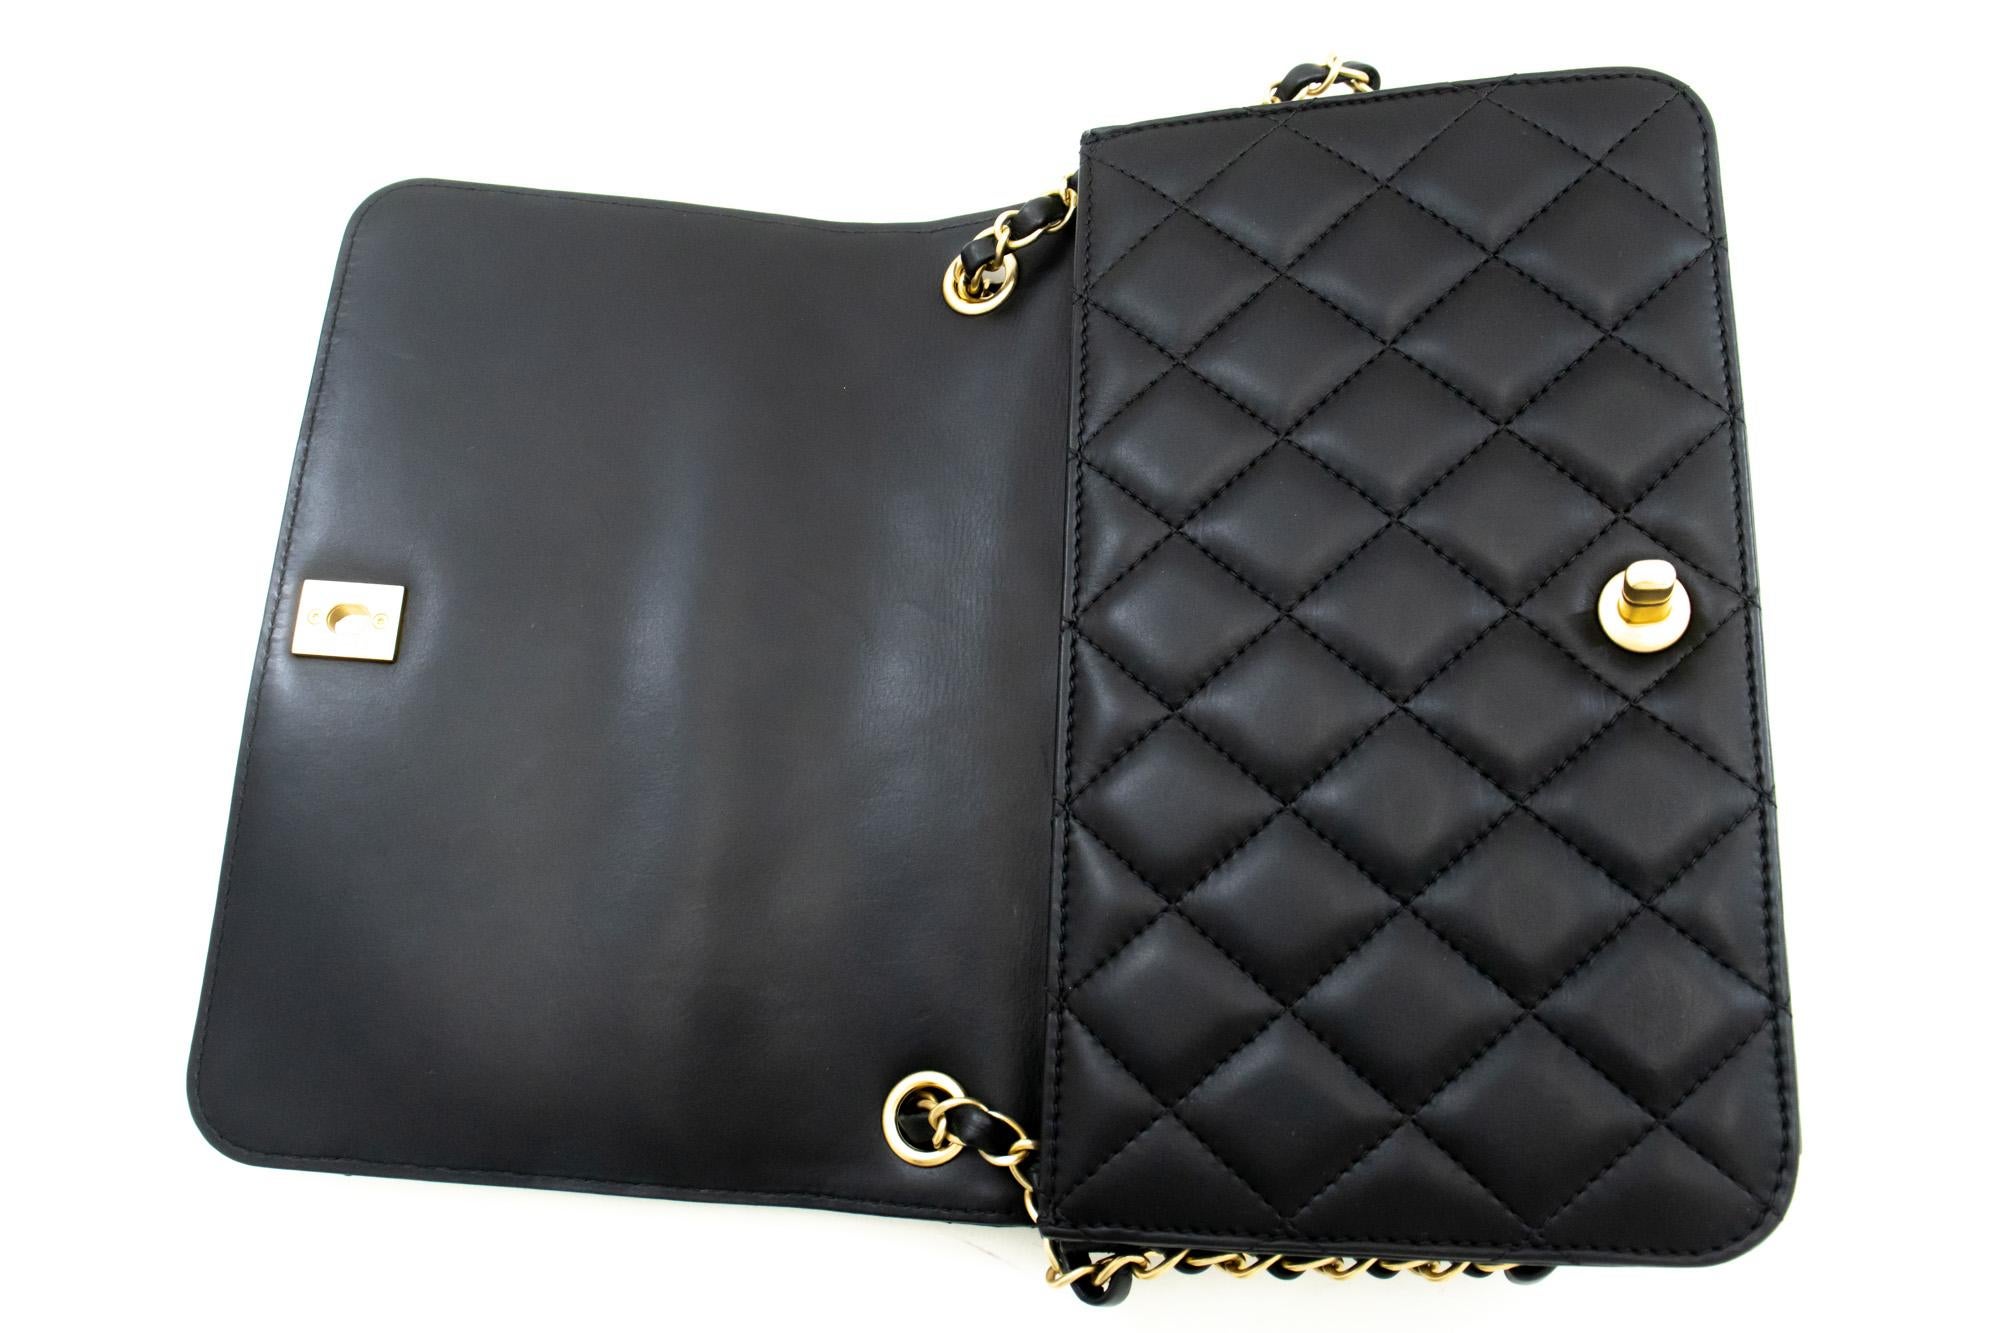 CHANEL Full Chain Flap Shoulder Bag Black Quilted Lambskin Leather For Sale 6